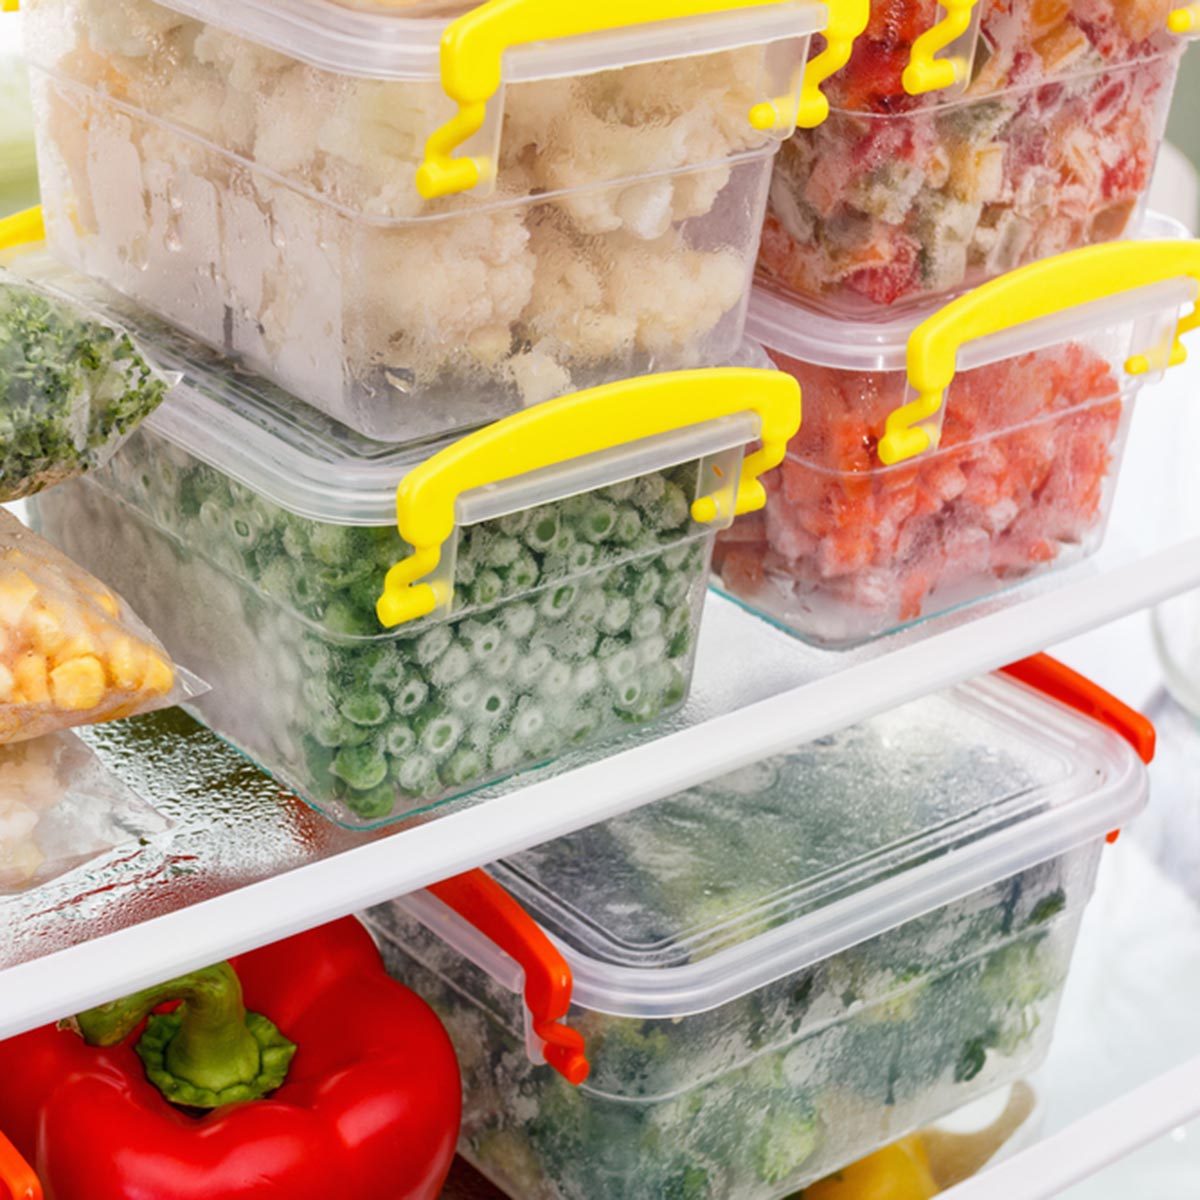 5 Bulk Food Storage Mistakes That Are Costing You Real Money